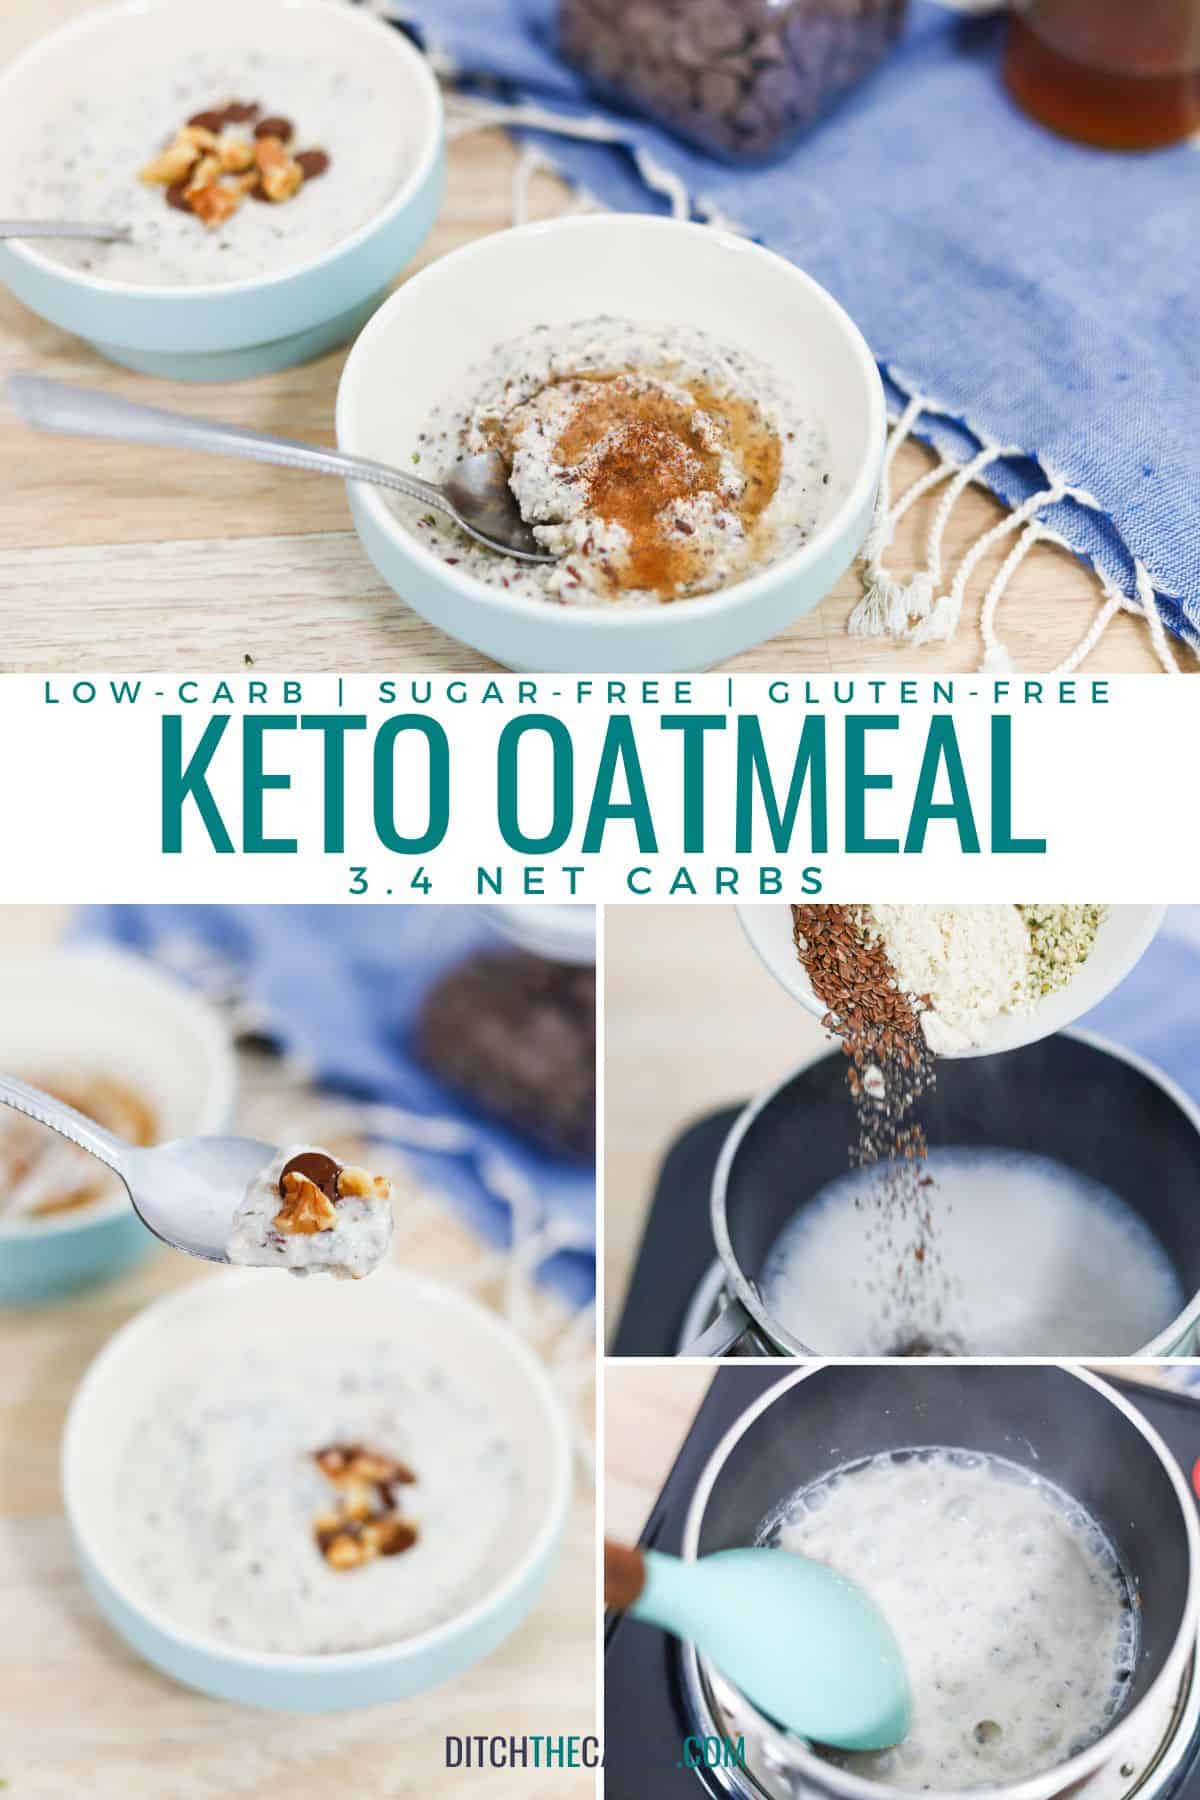 A collage of photos showing keto oatmeal recipe being made at various stages.